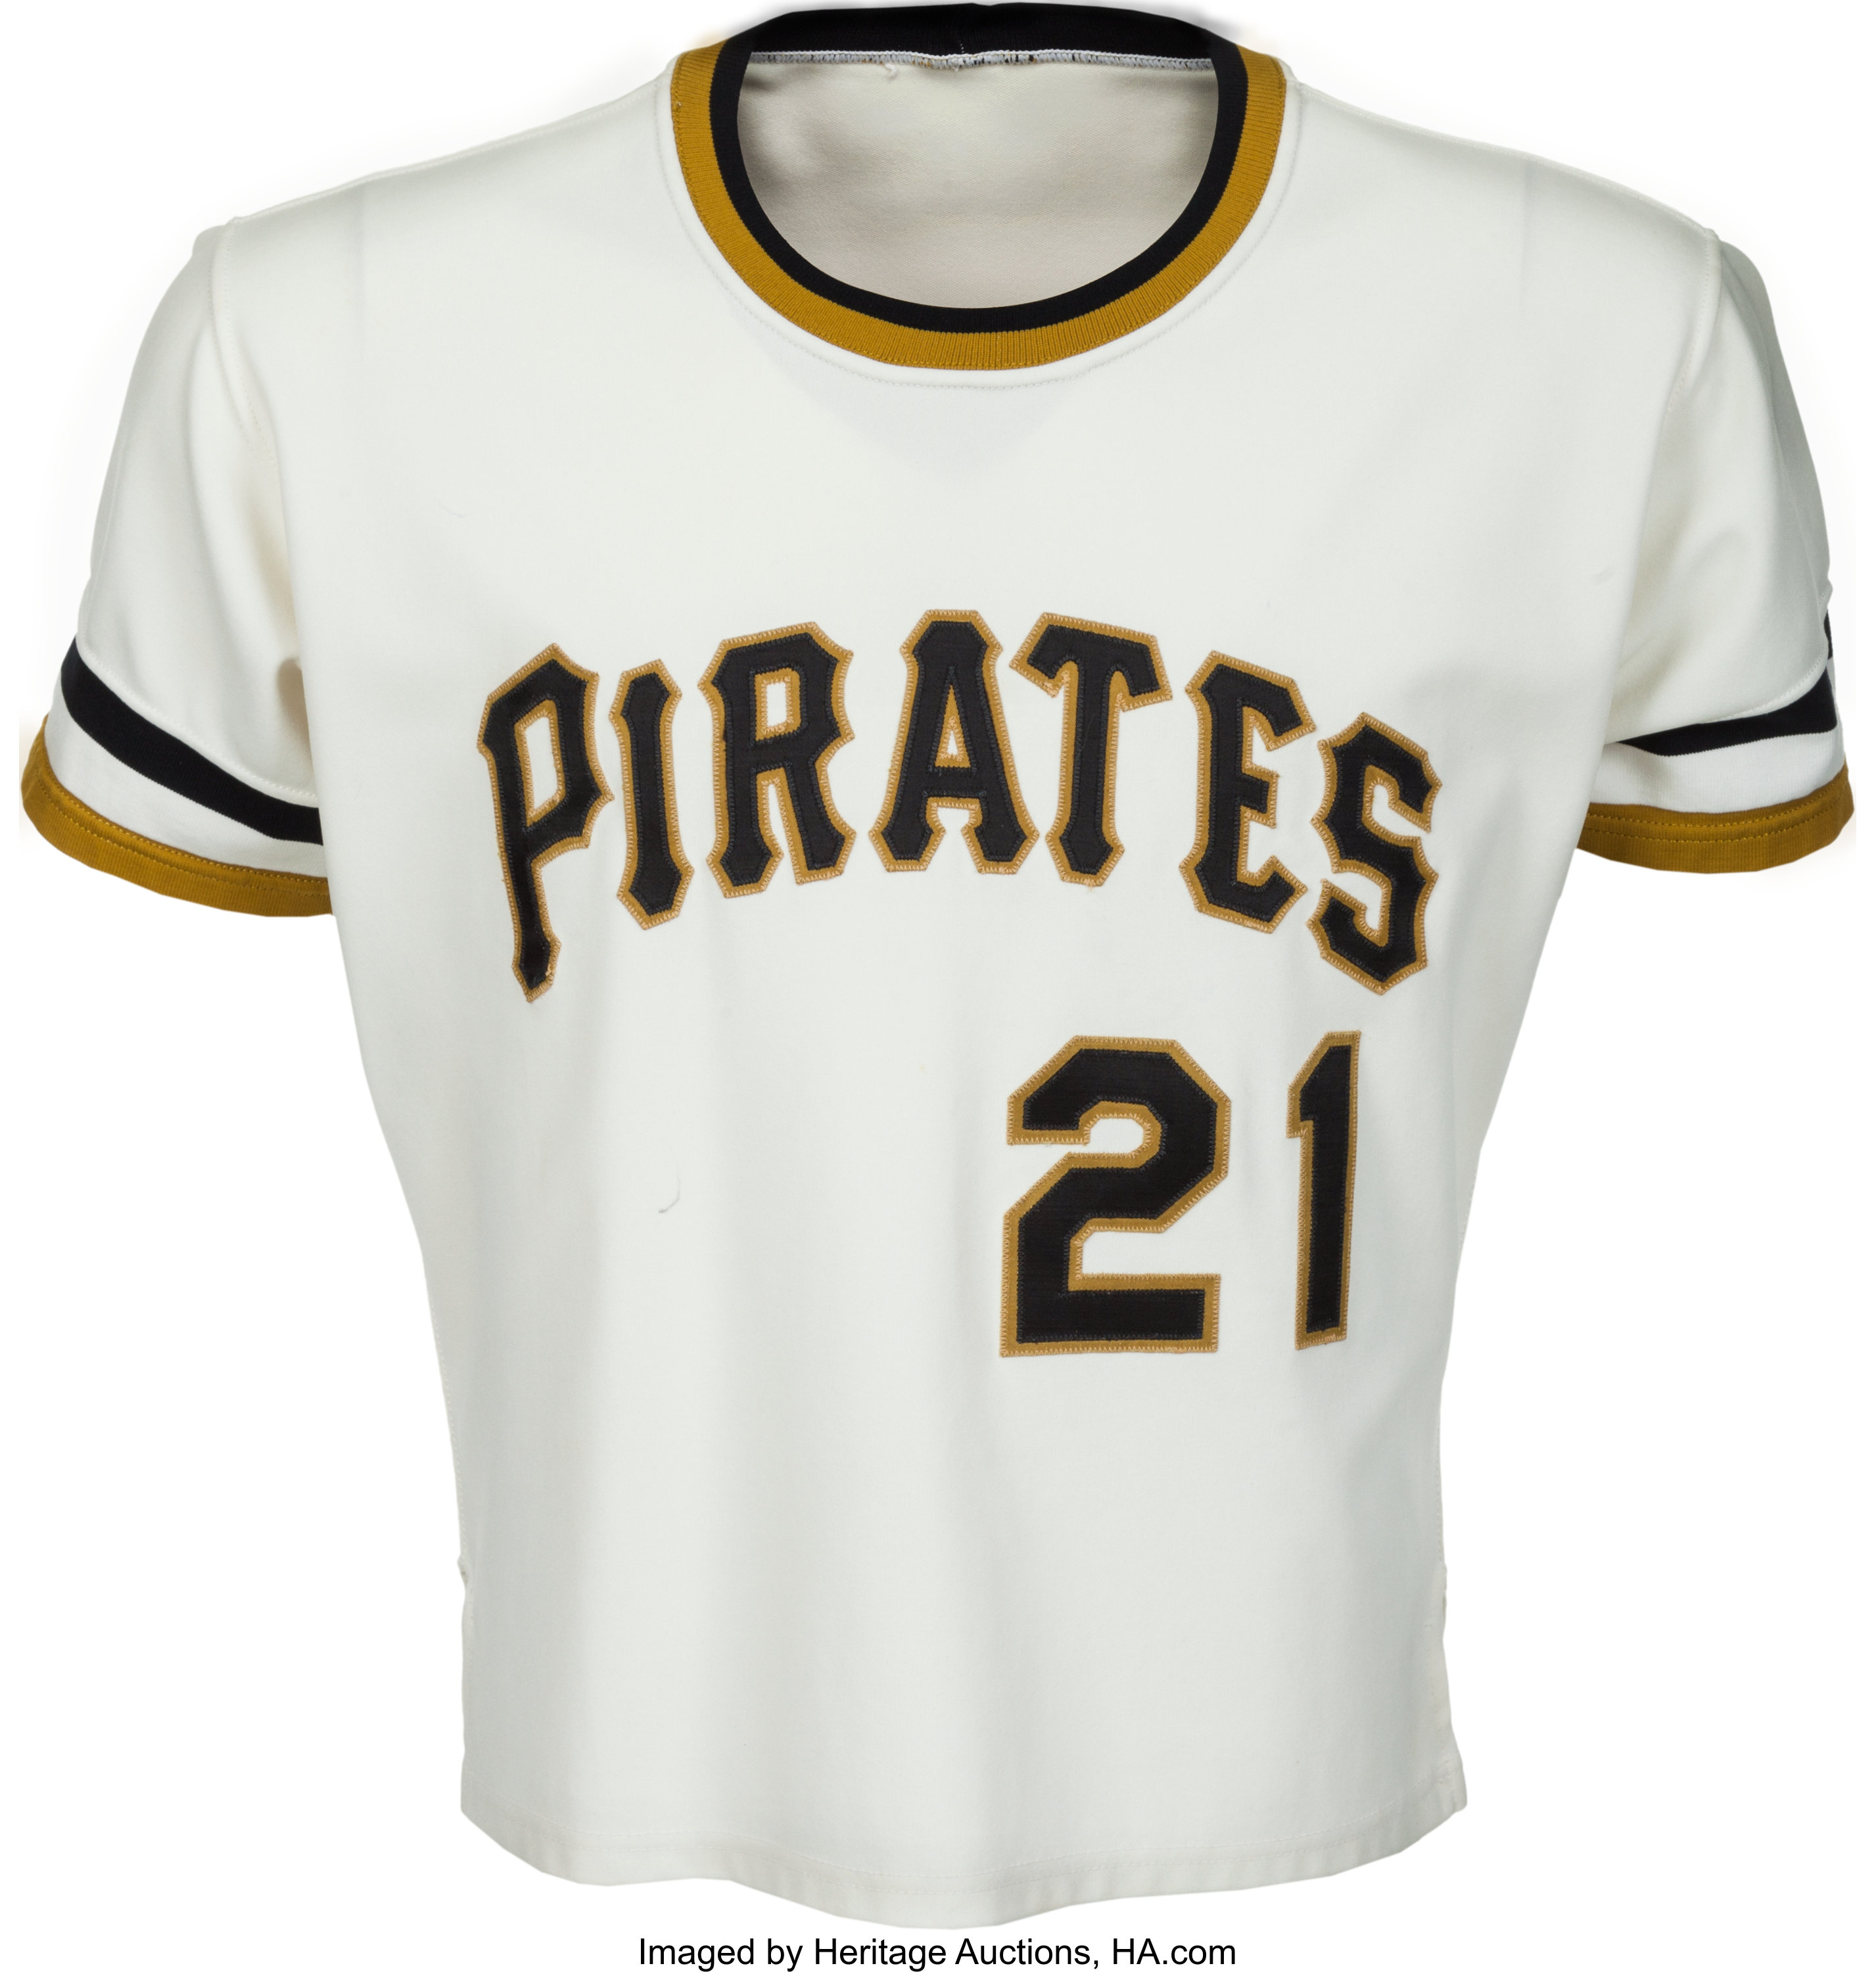 Pittsburgh Pirates Blank # Game Issued Grey Jersey 54 PITT32670